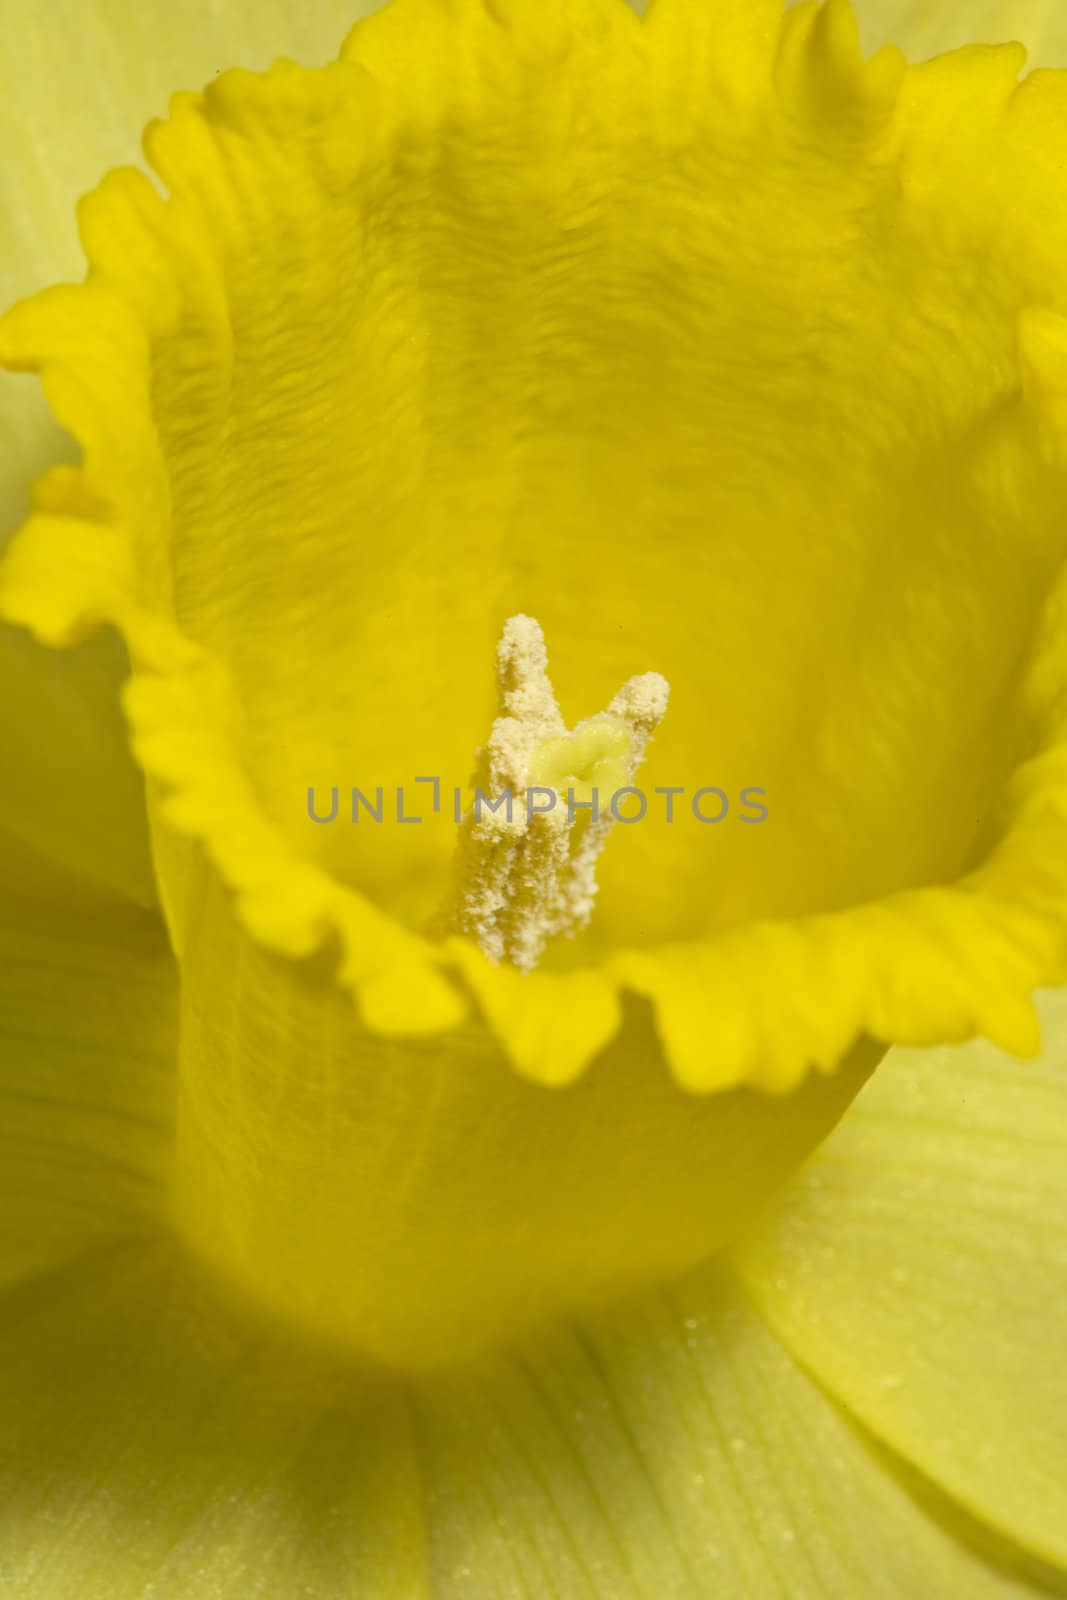 A close up view of a daffodil.